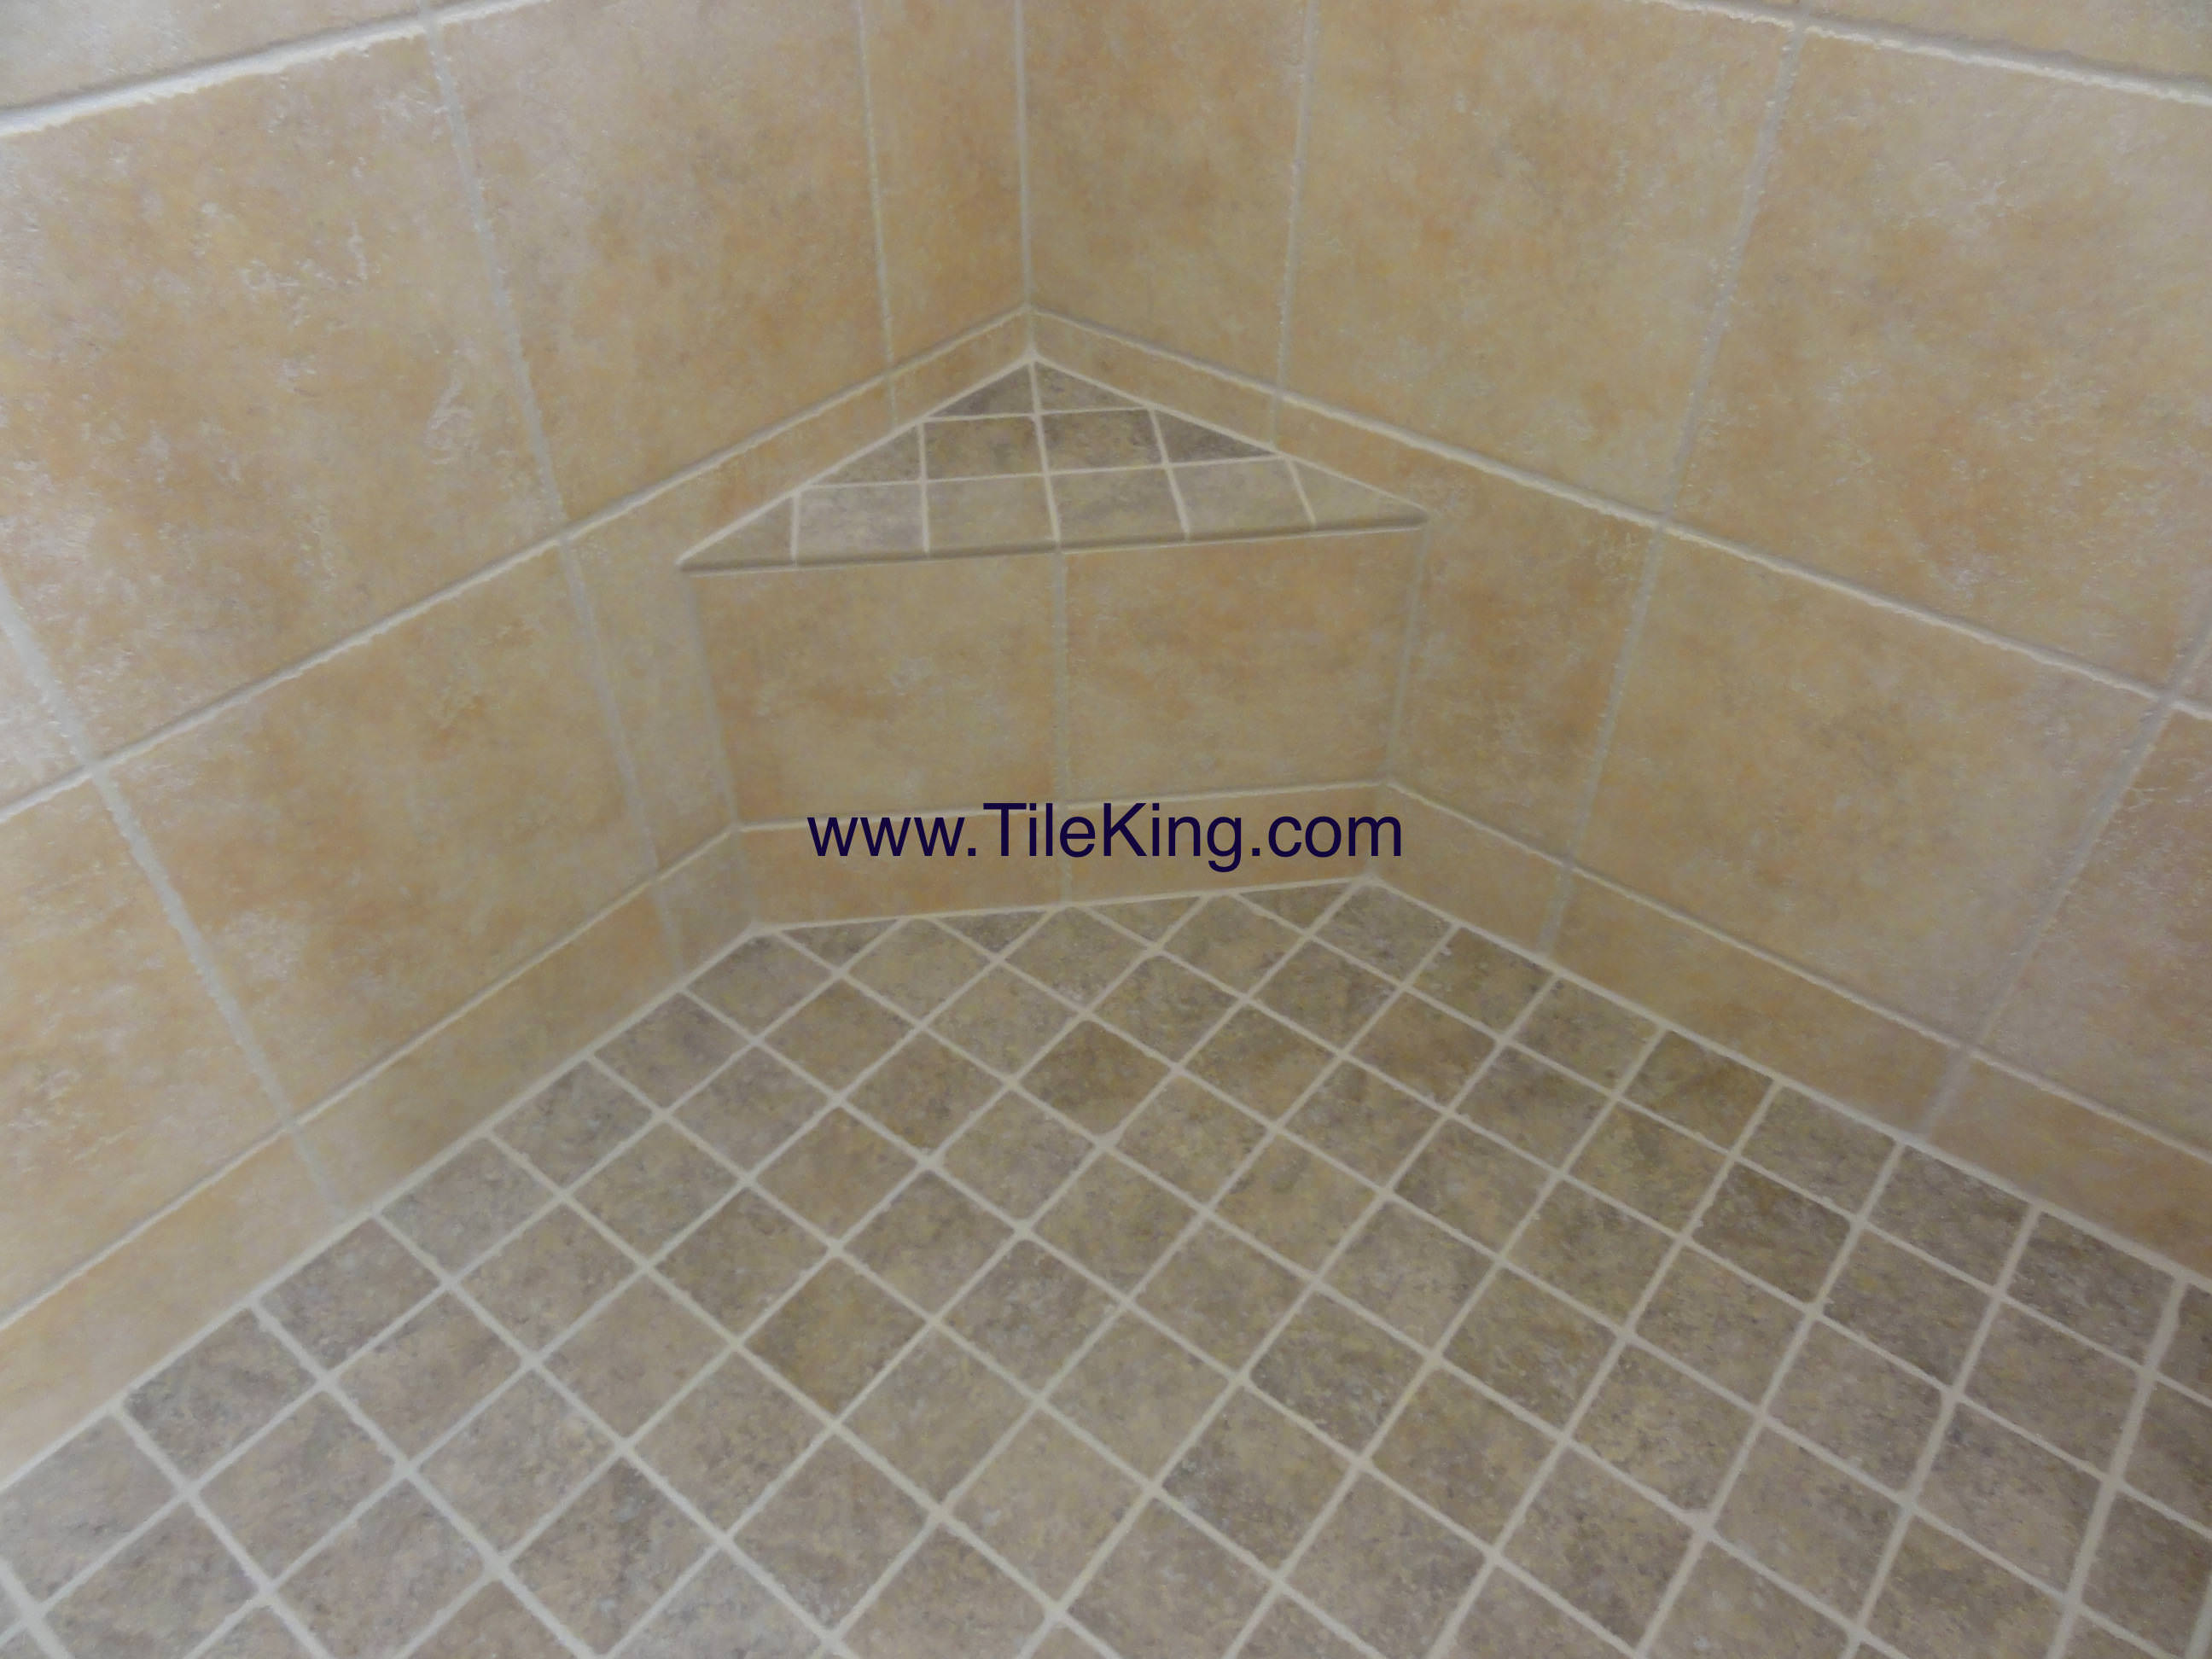 Travertine Shower After Cleaning & Sealing